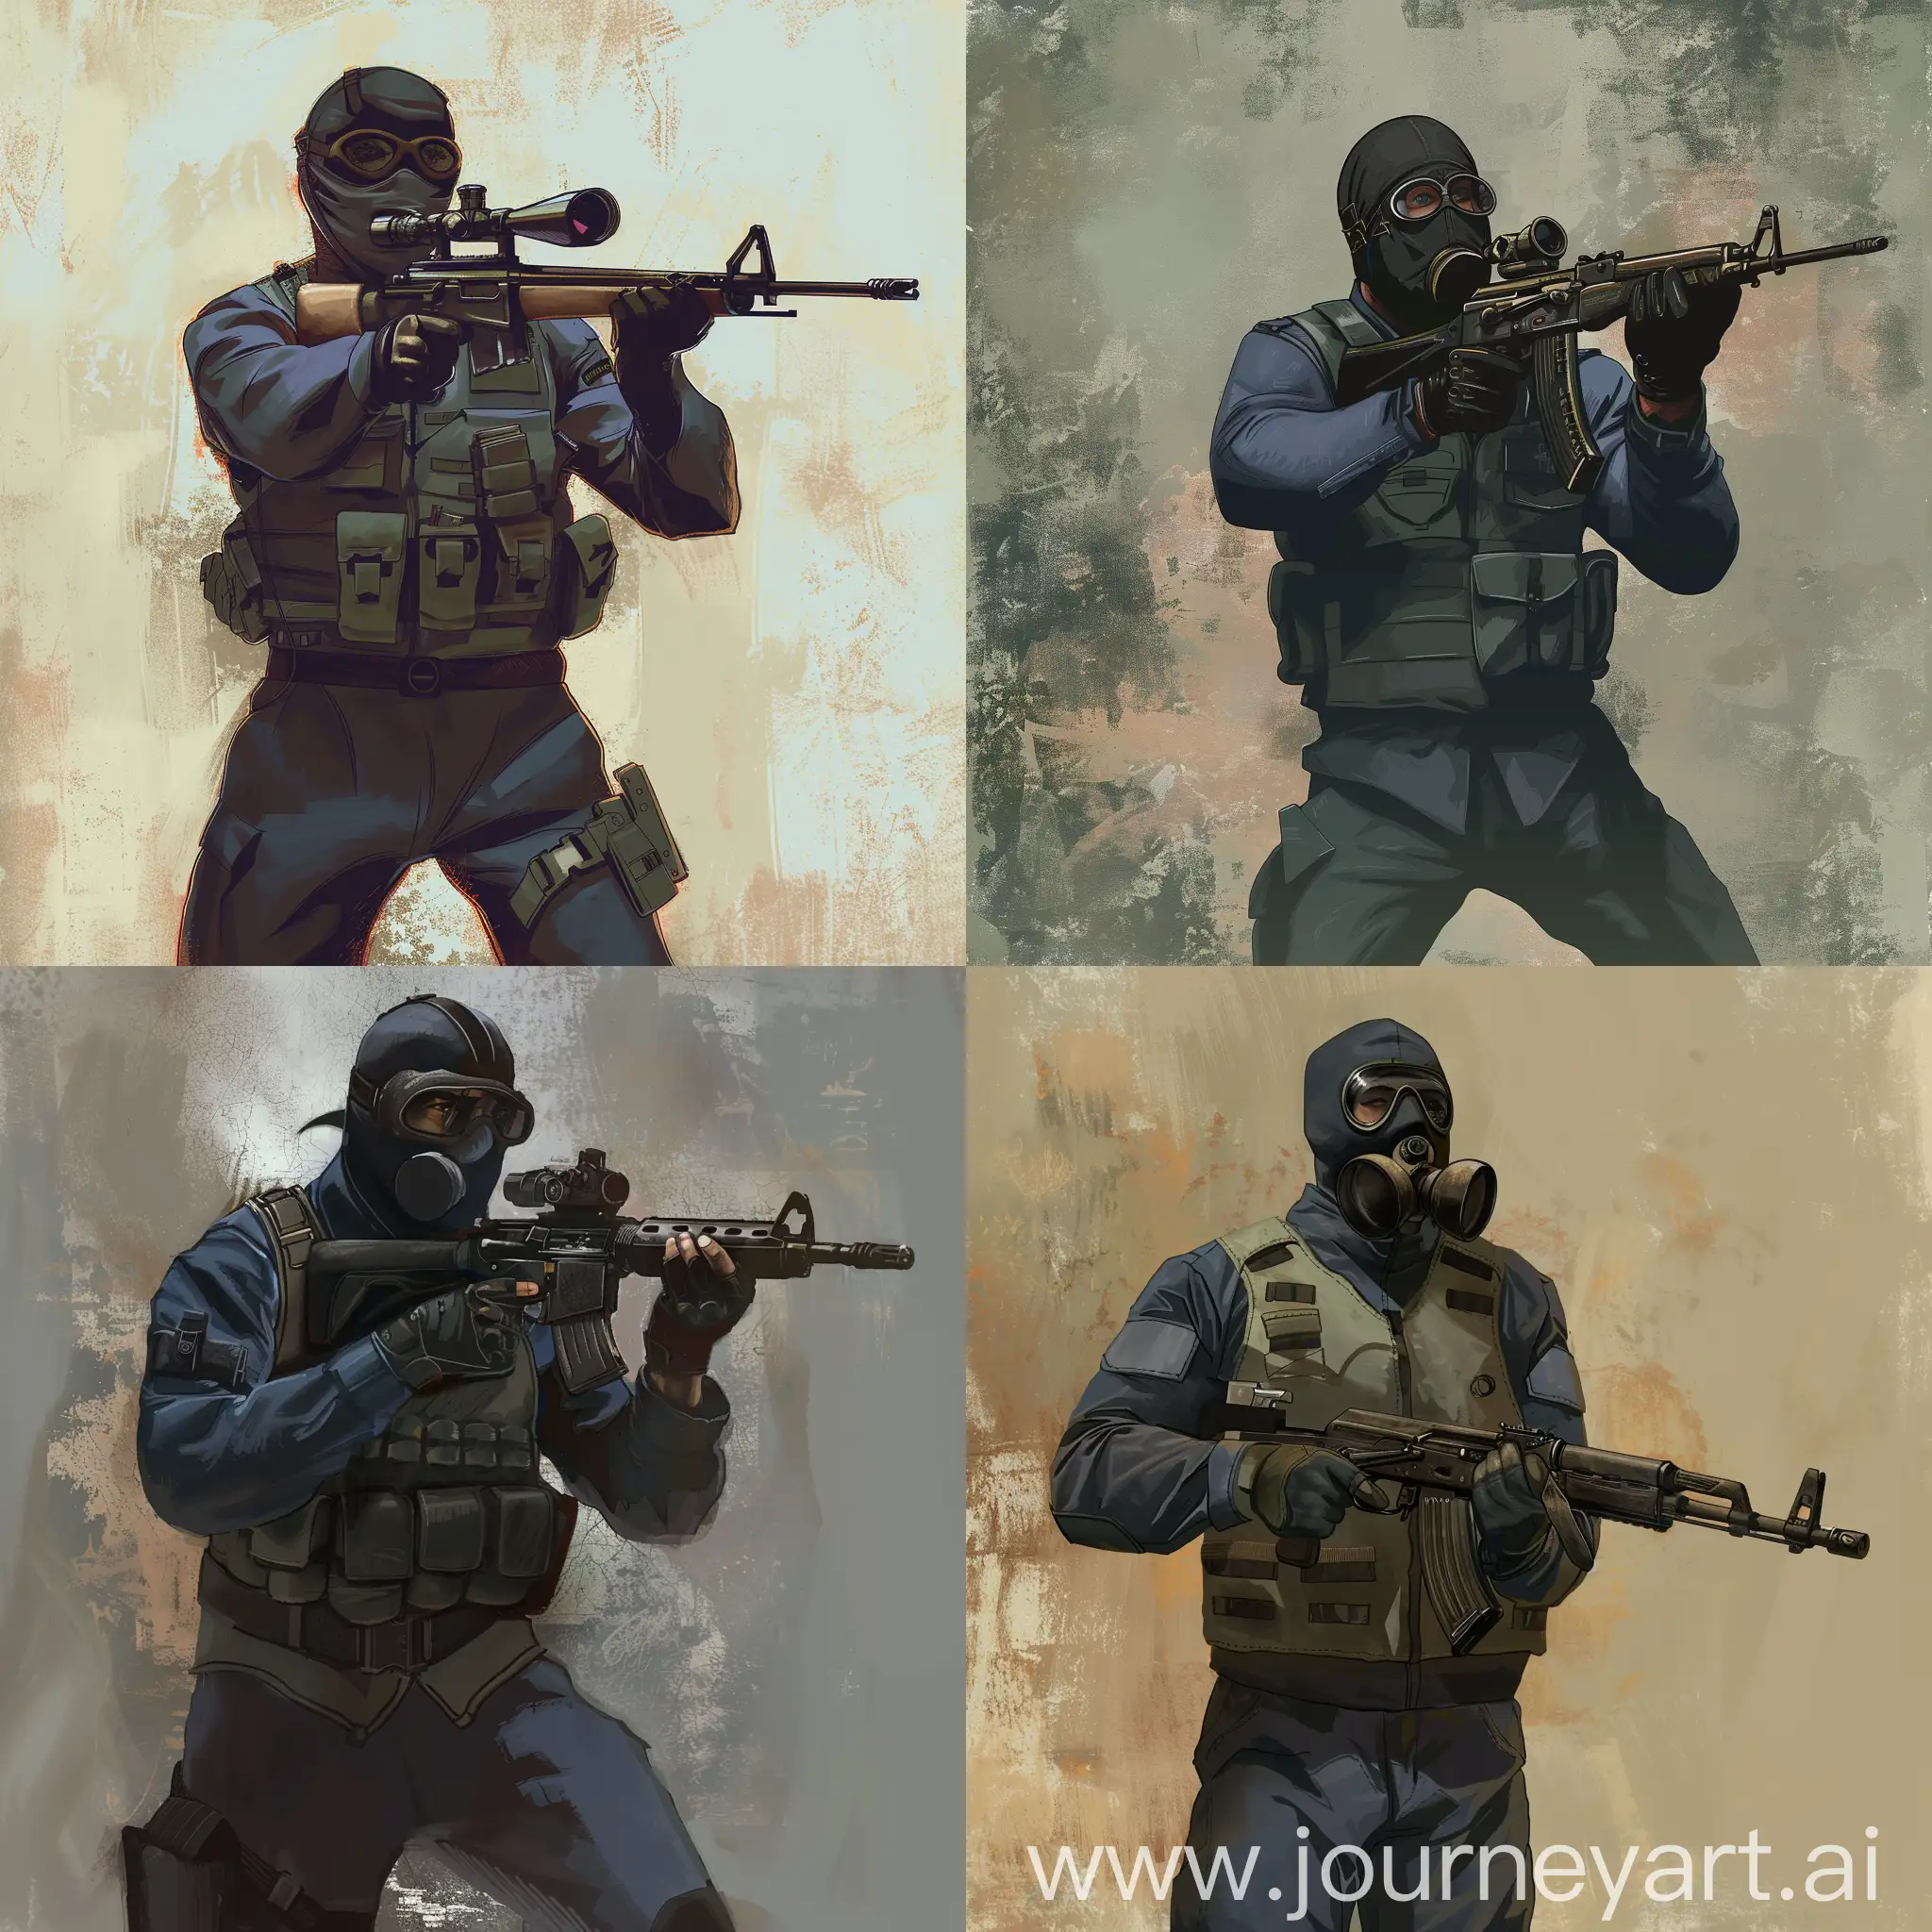 Concept art character, full body art, an American soldier of the Vietnam War in a old time military vest, with a sniper rifle in his hands, a balaclava on his face, a gas mask on top of the balaclava of that time.